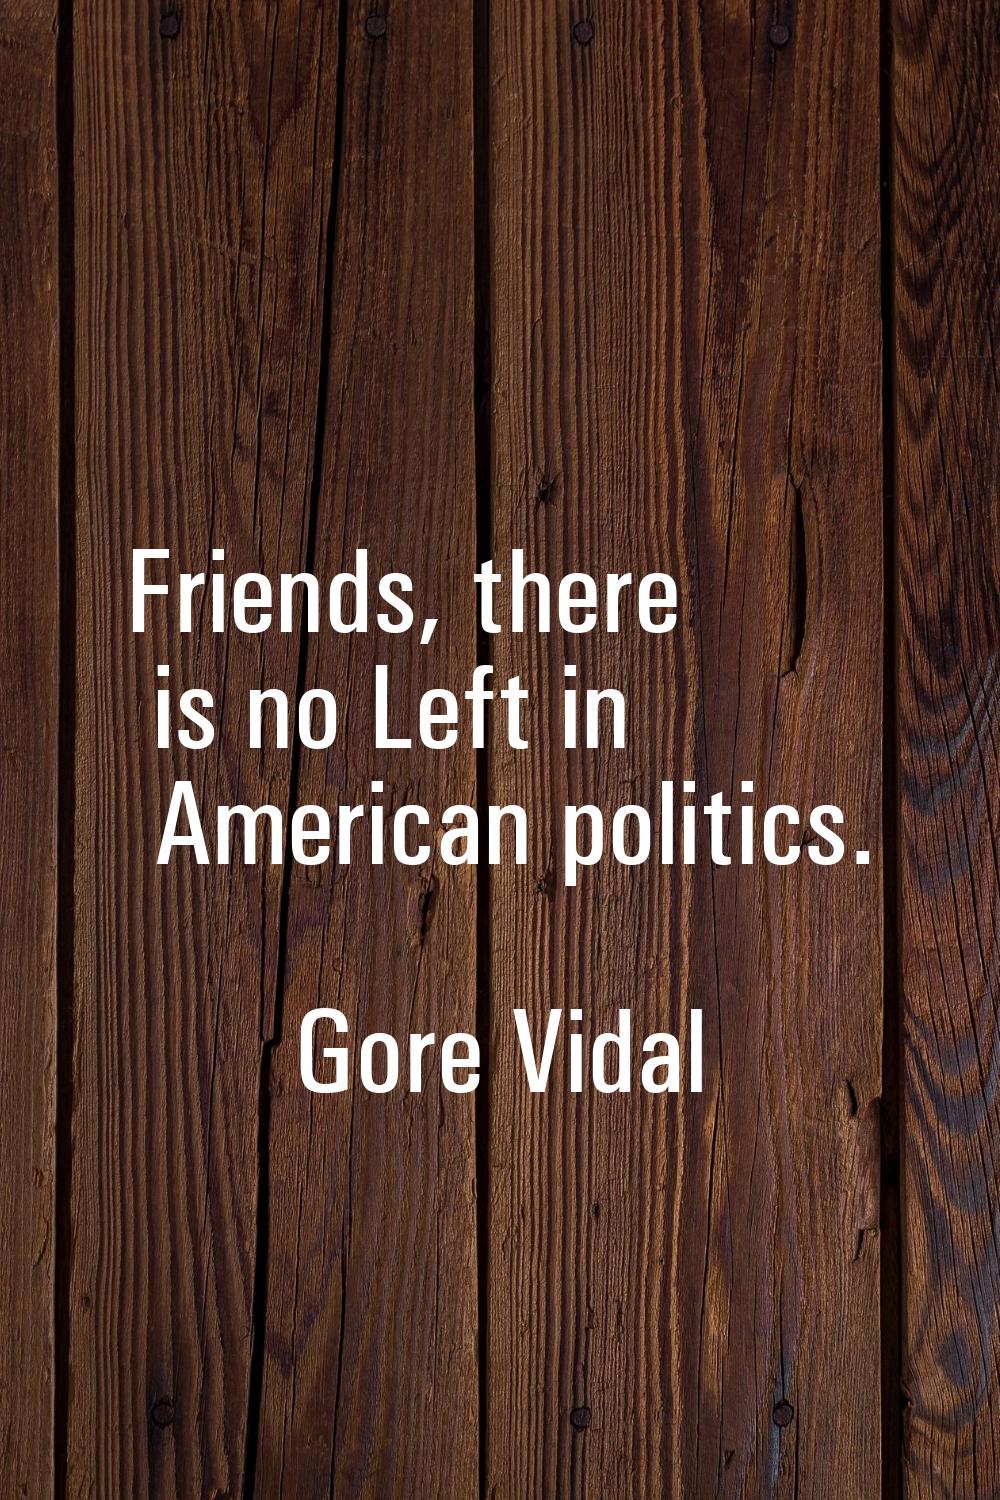 Friends, there is no Left in American politics.